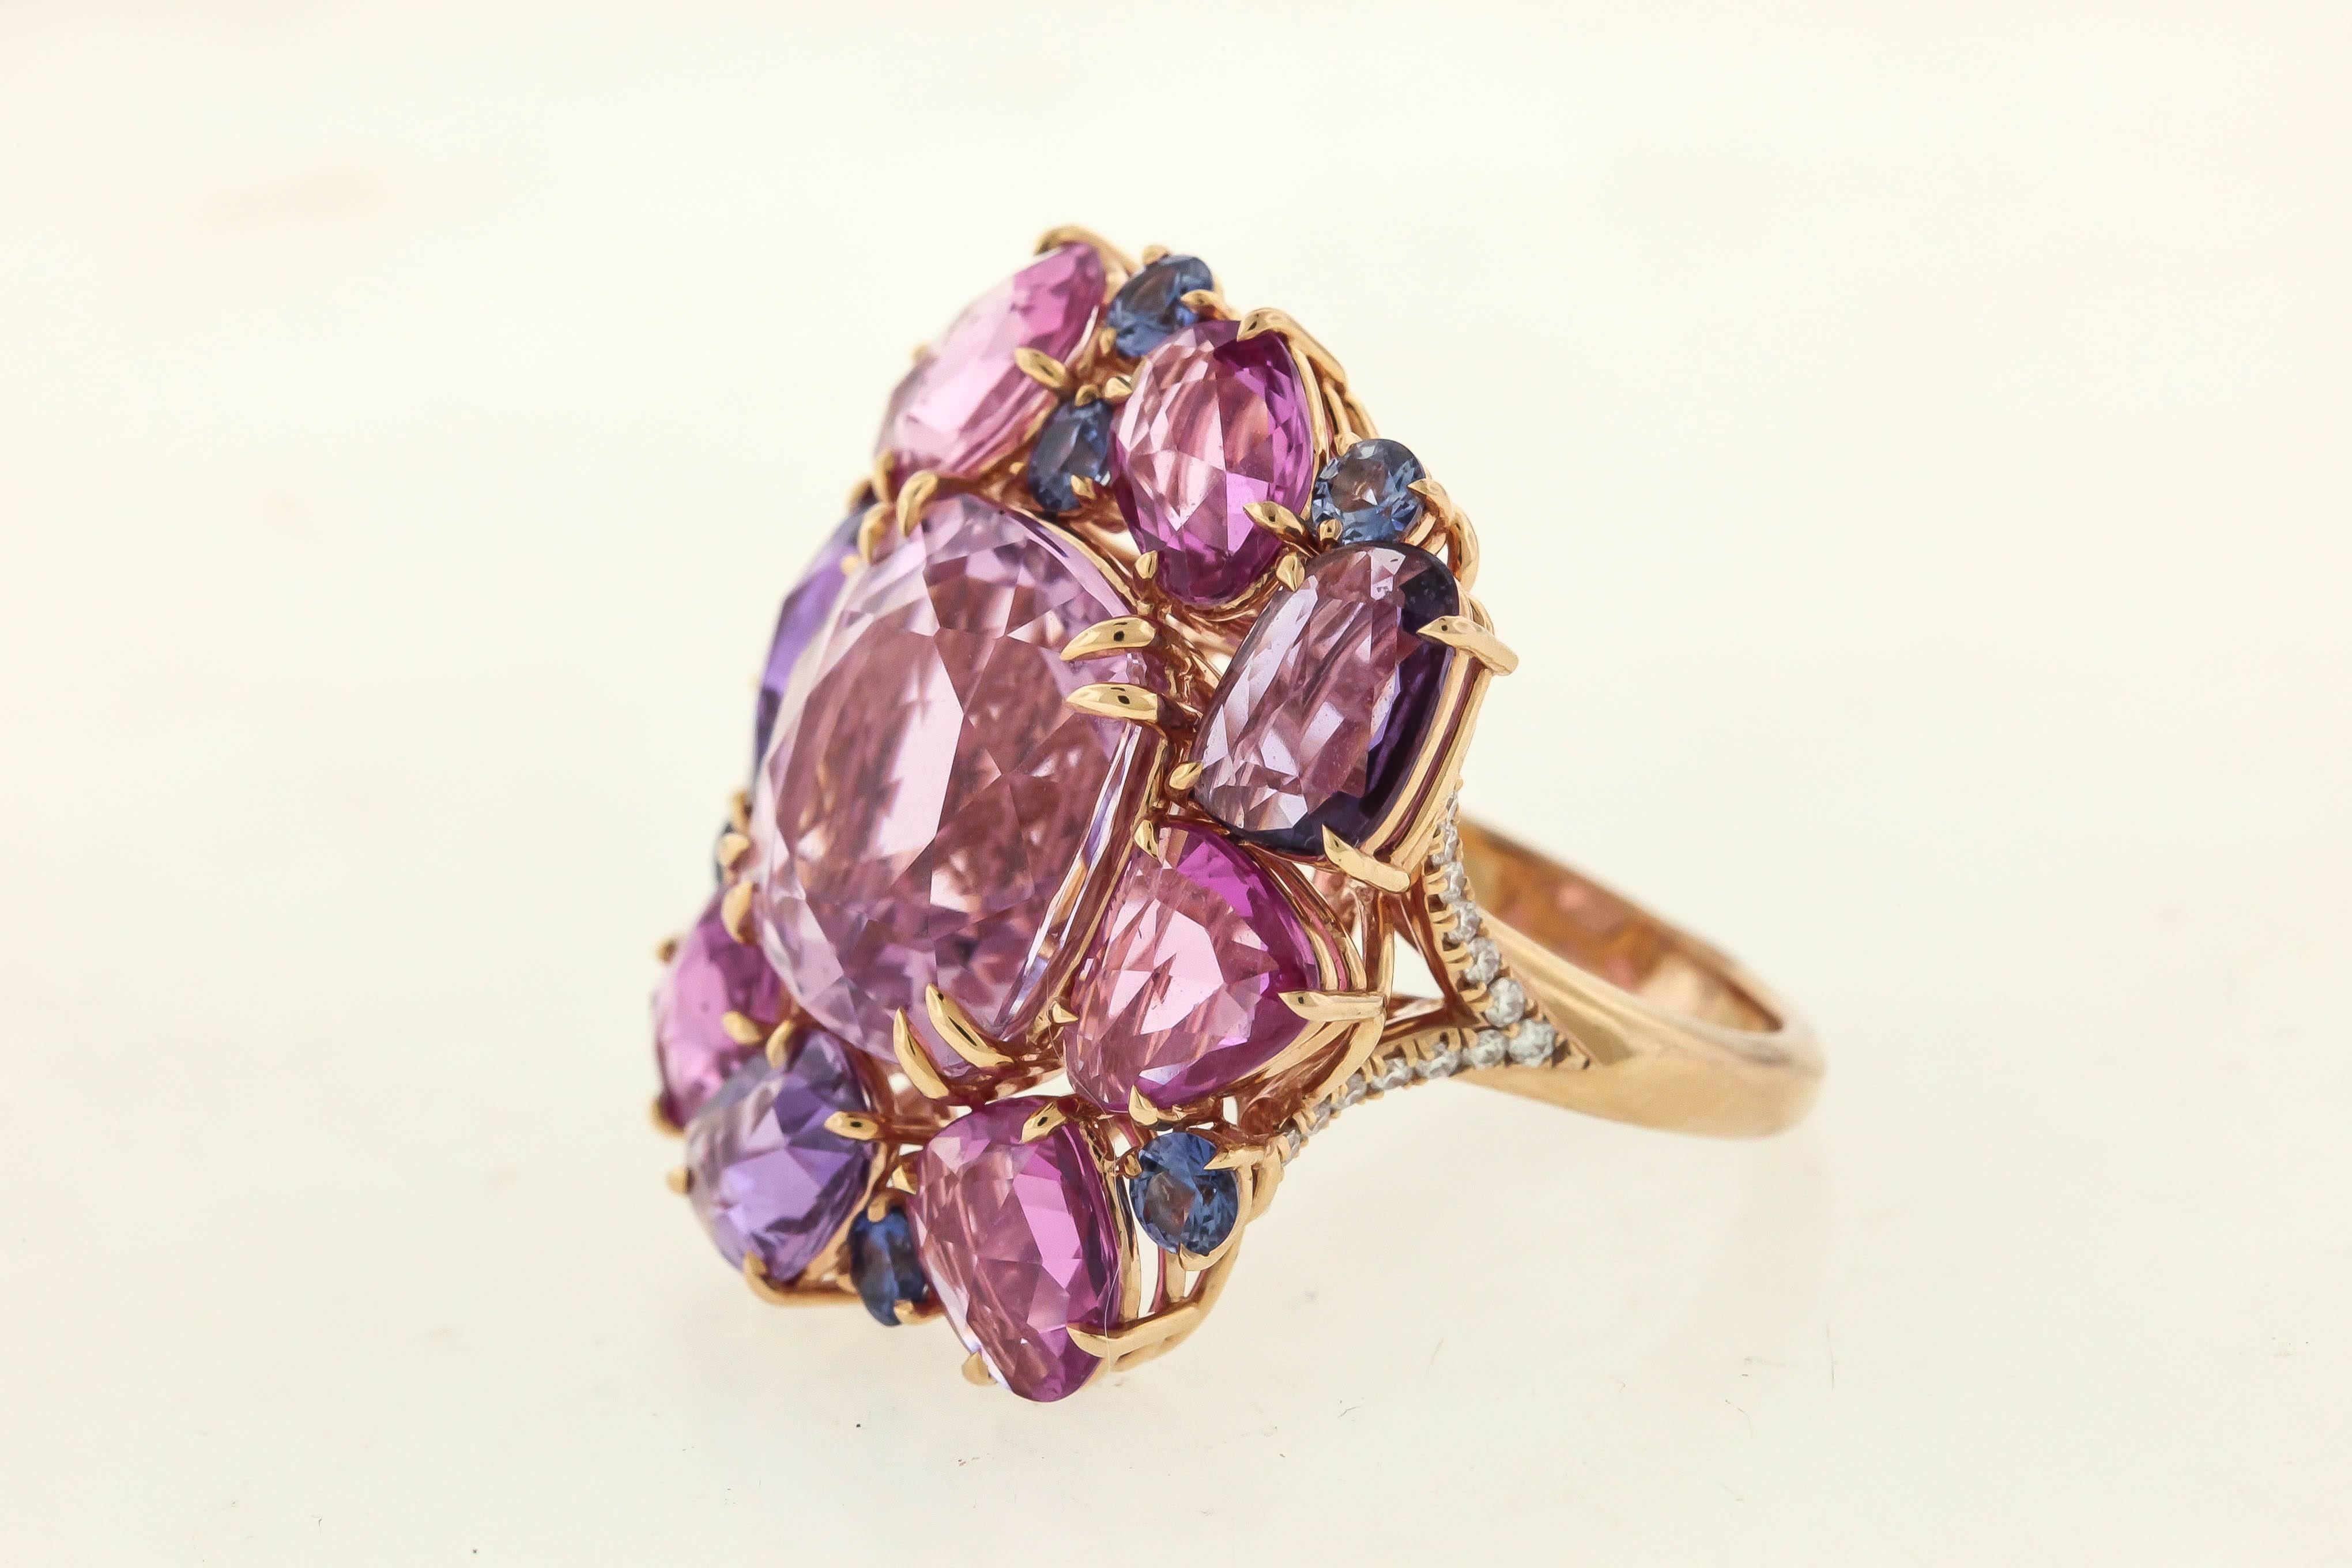 A delicious cocktail ring from Omi Privé, the 12.39 carat pink kunzite surrounded with rose-cut ombré sapphires shading from pink to rose to lavender, accented with blue sapphires, tw sapphires 8.18 cts and 0.19 cts diamonds on the 18K rose gold